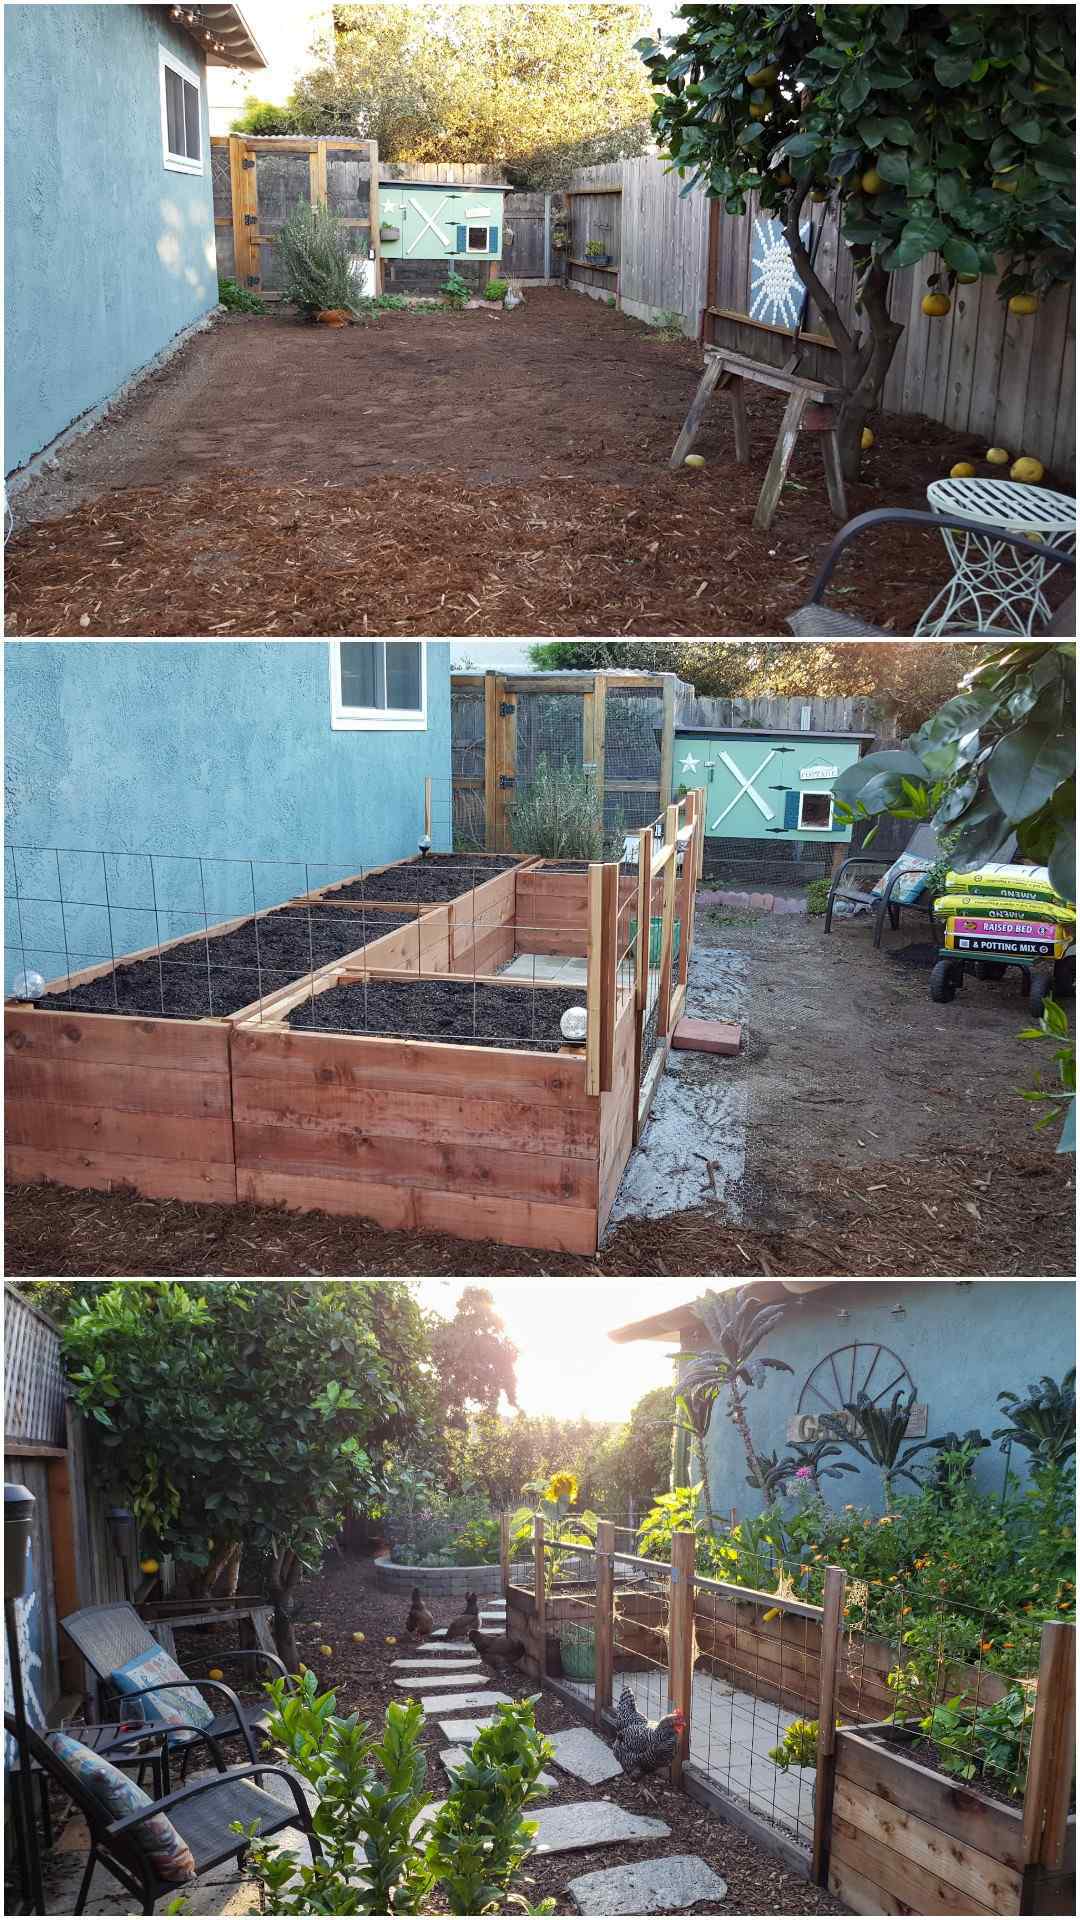 A three part image collage of the coop garden area during its second renovation. The first image shows coop garden after the original garden beds have been removed, a large swathe of area has been leveled and raked clear of debris. The second image shows the garden after the new garden beds have been constructed and installed. They four beds were positioned in a U-shape next to the side of the house, there are trellises on the beds and a small fence and gate on the front side of the beds to keep the chickens out. The beds are full of soil and ready for plants. The third image shows the same coop garden from the opposite direction, the beds are overflowing with flowers and kale, the sun is shining through the trees and there are four chickens pecking around the outside of the garden area.